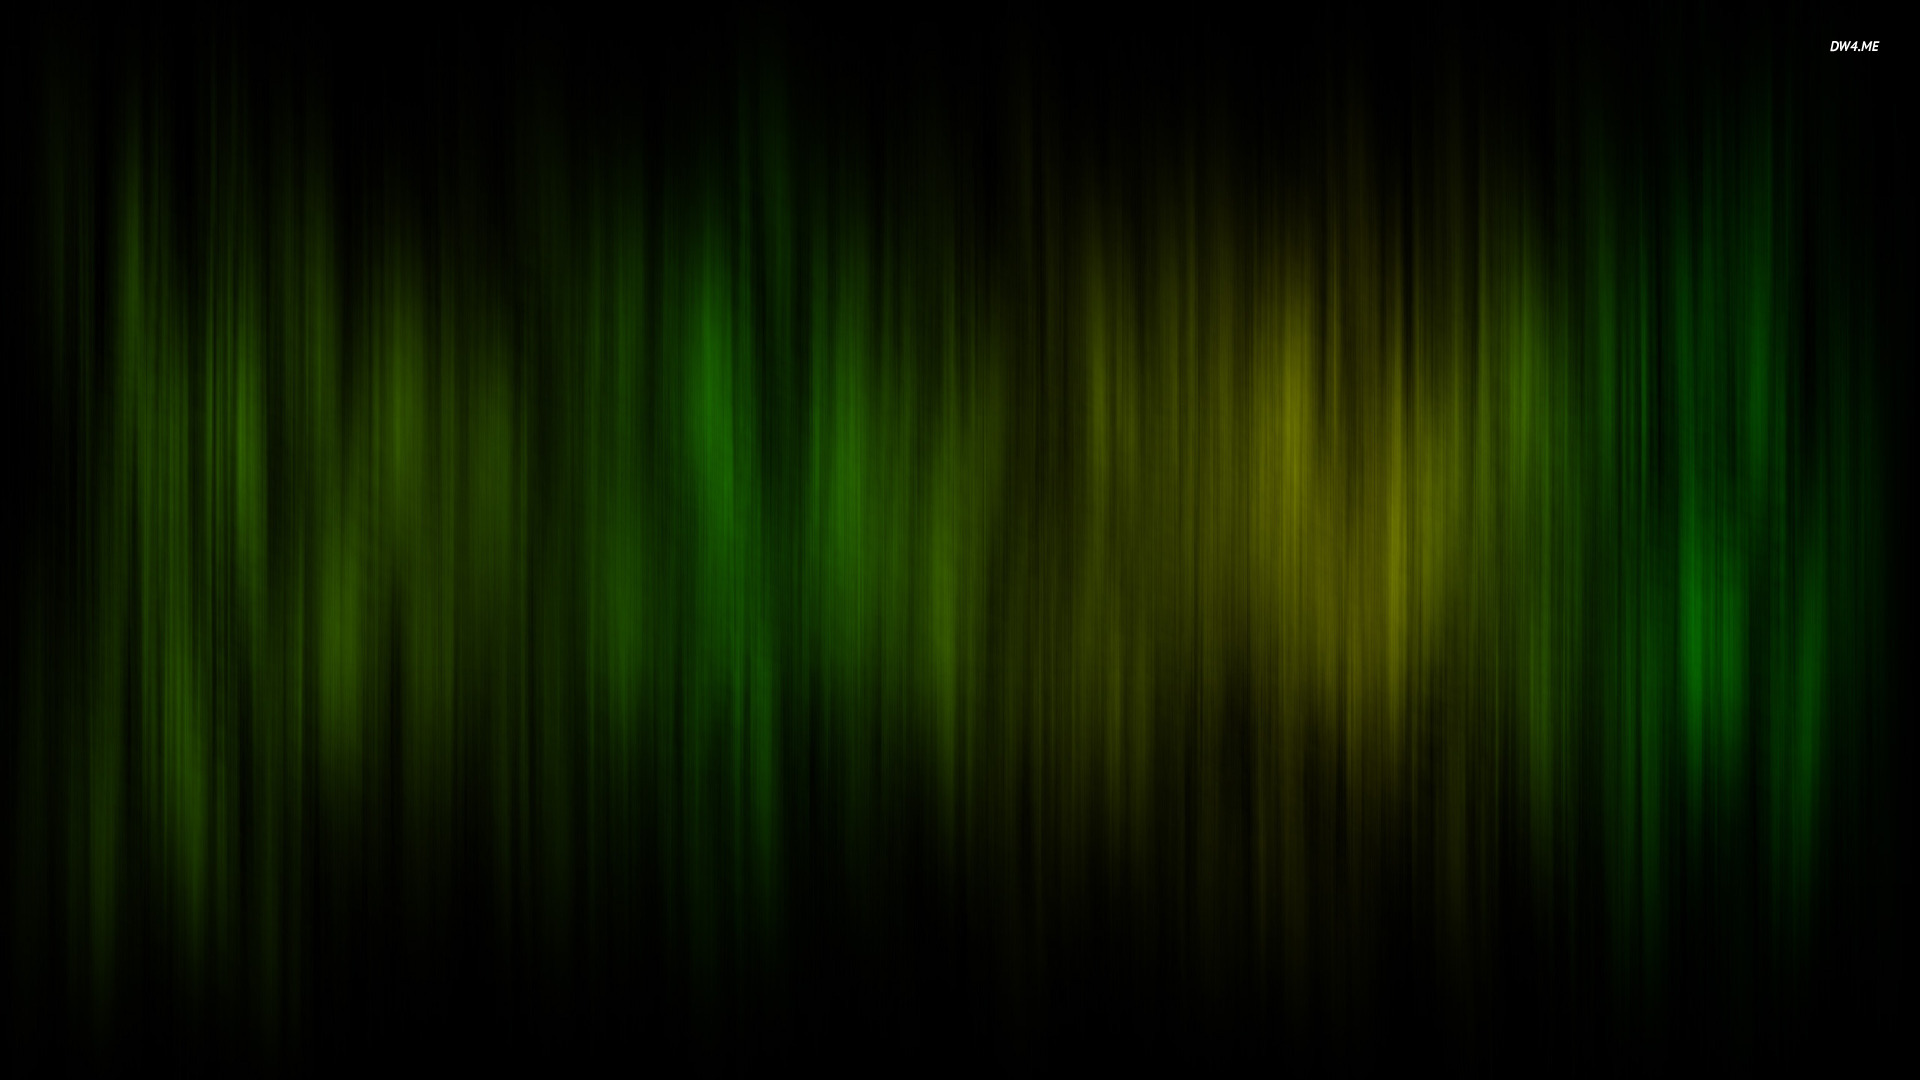 Cool Wallpapers Black Green Related Keywords amp Suggestions